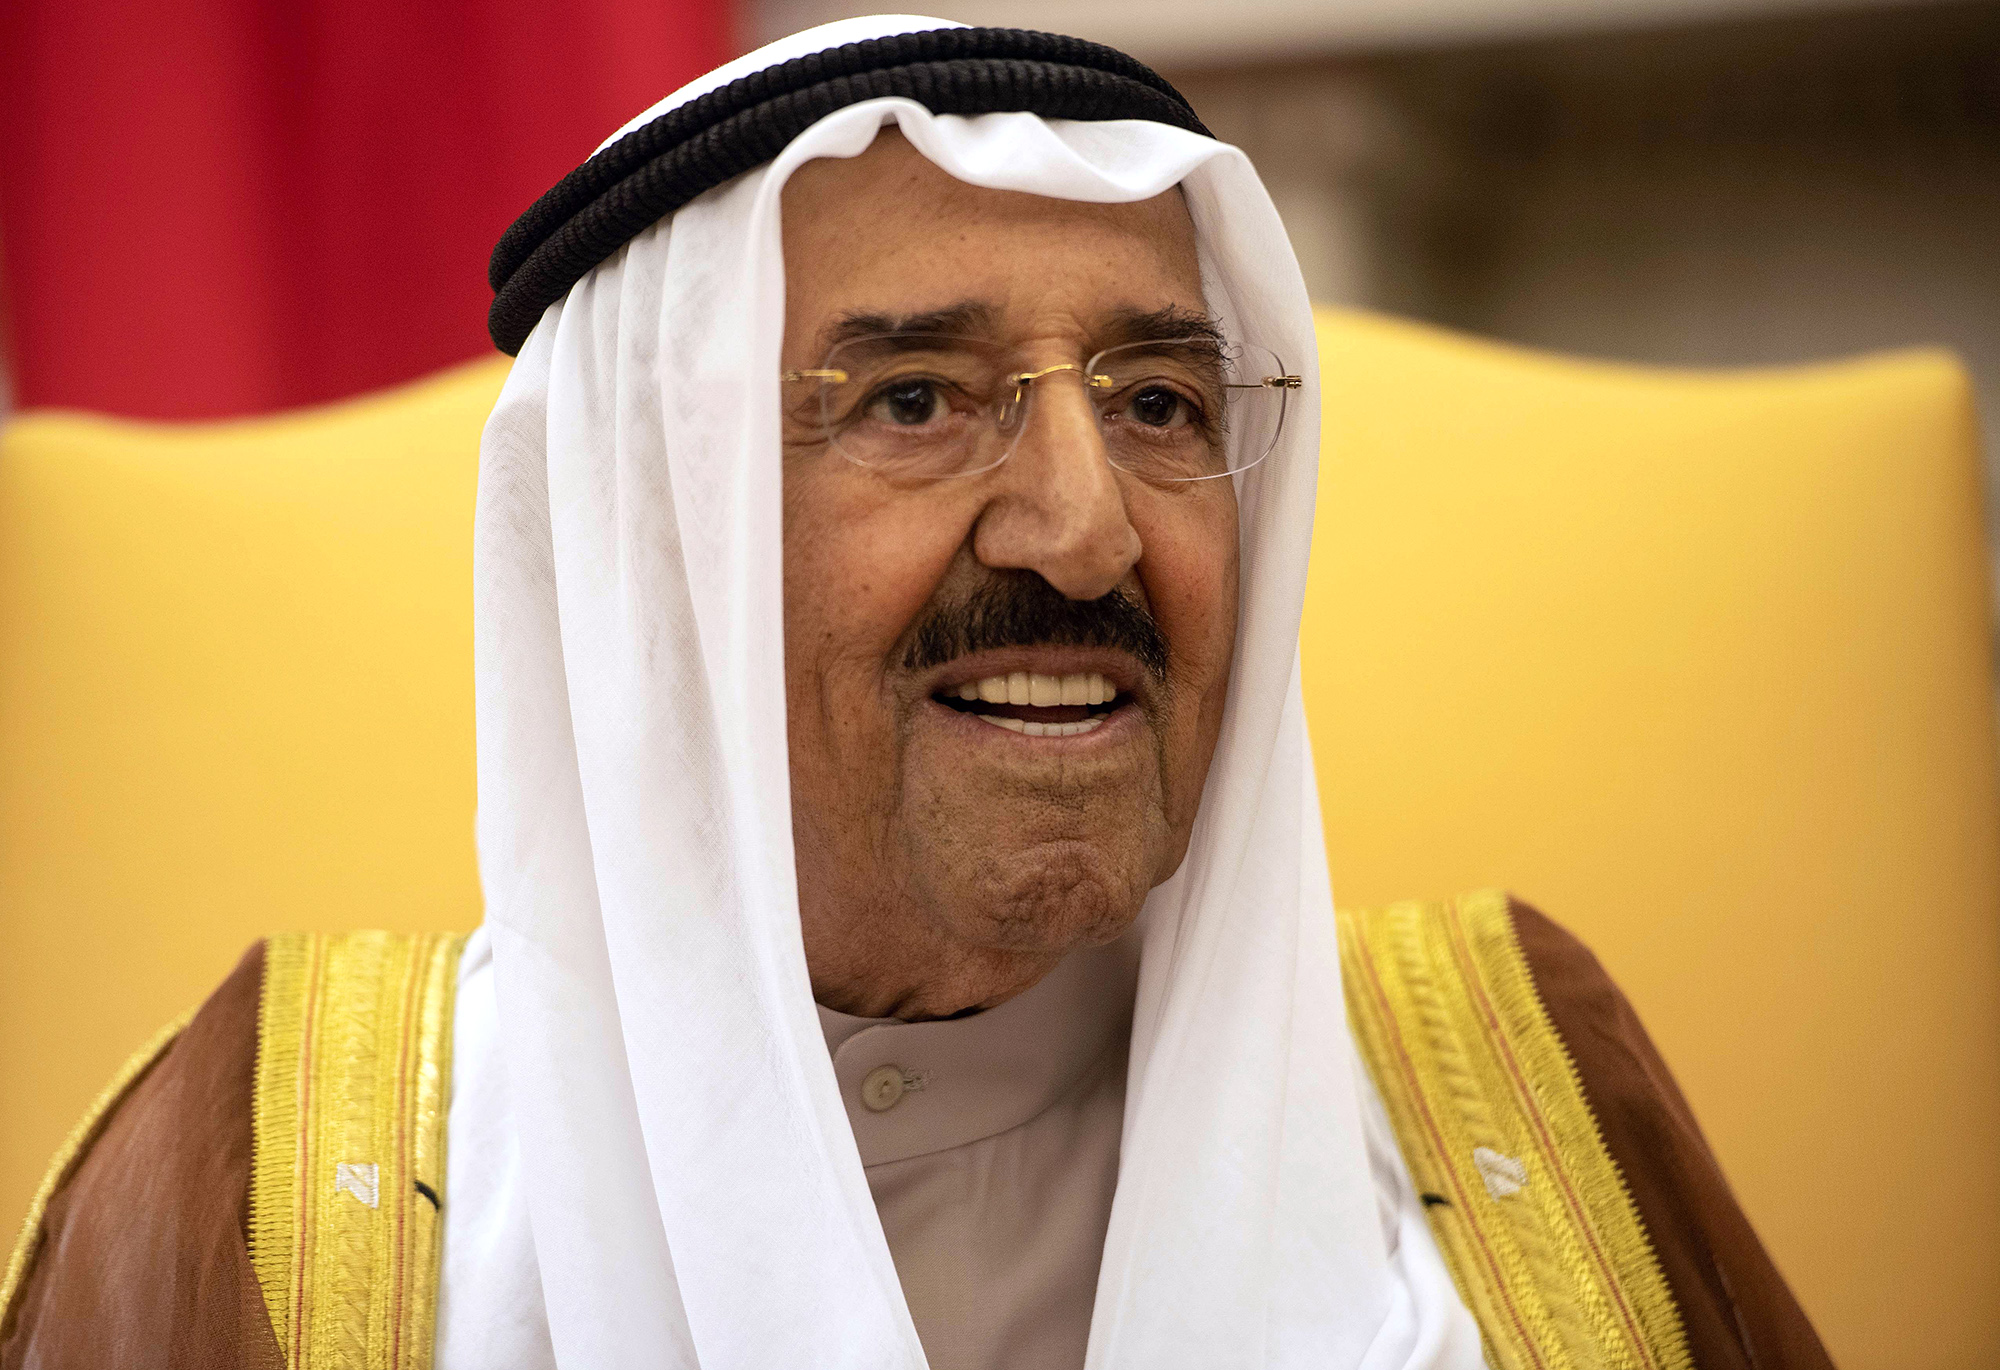 Sheikh Sabah Kuwaiti Leader Who Tried to Heal Rifts Dies at 91